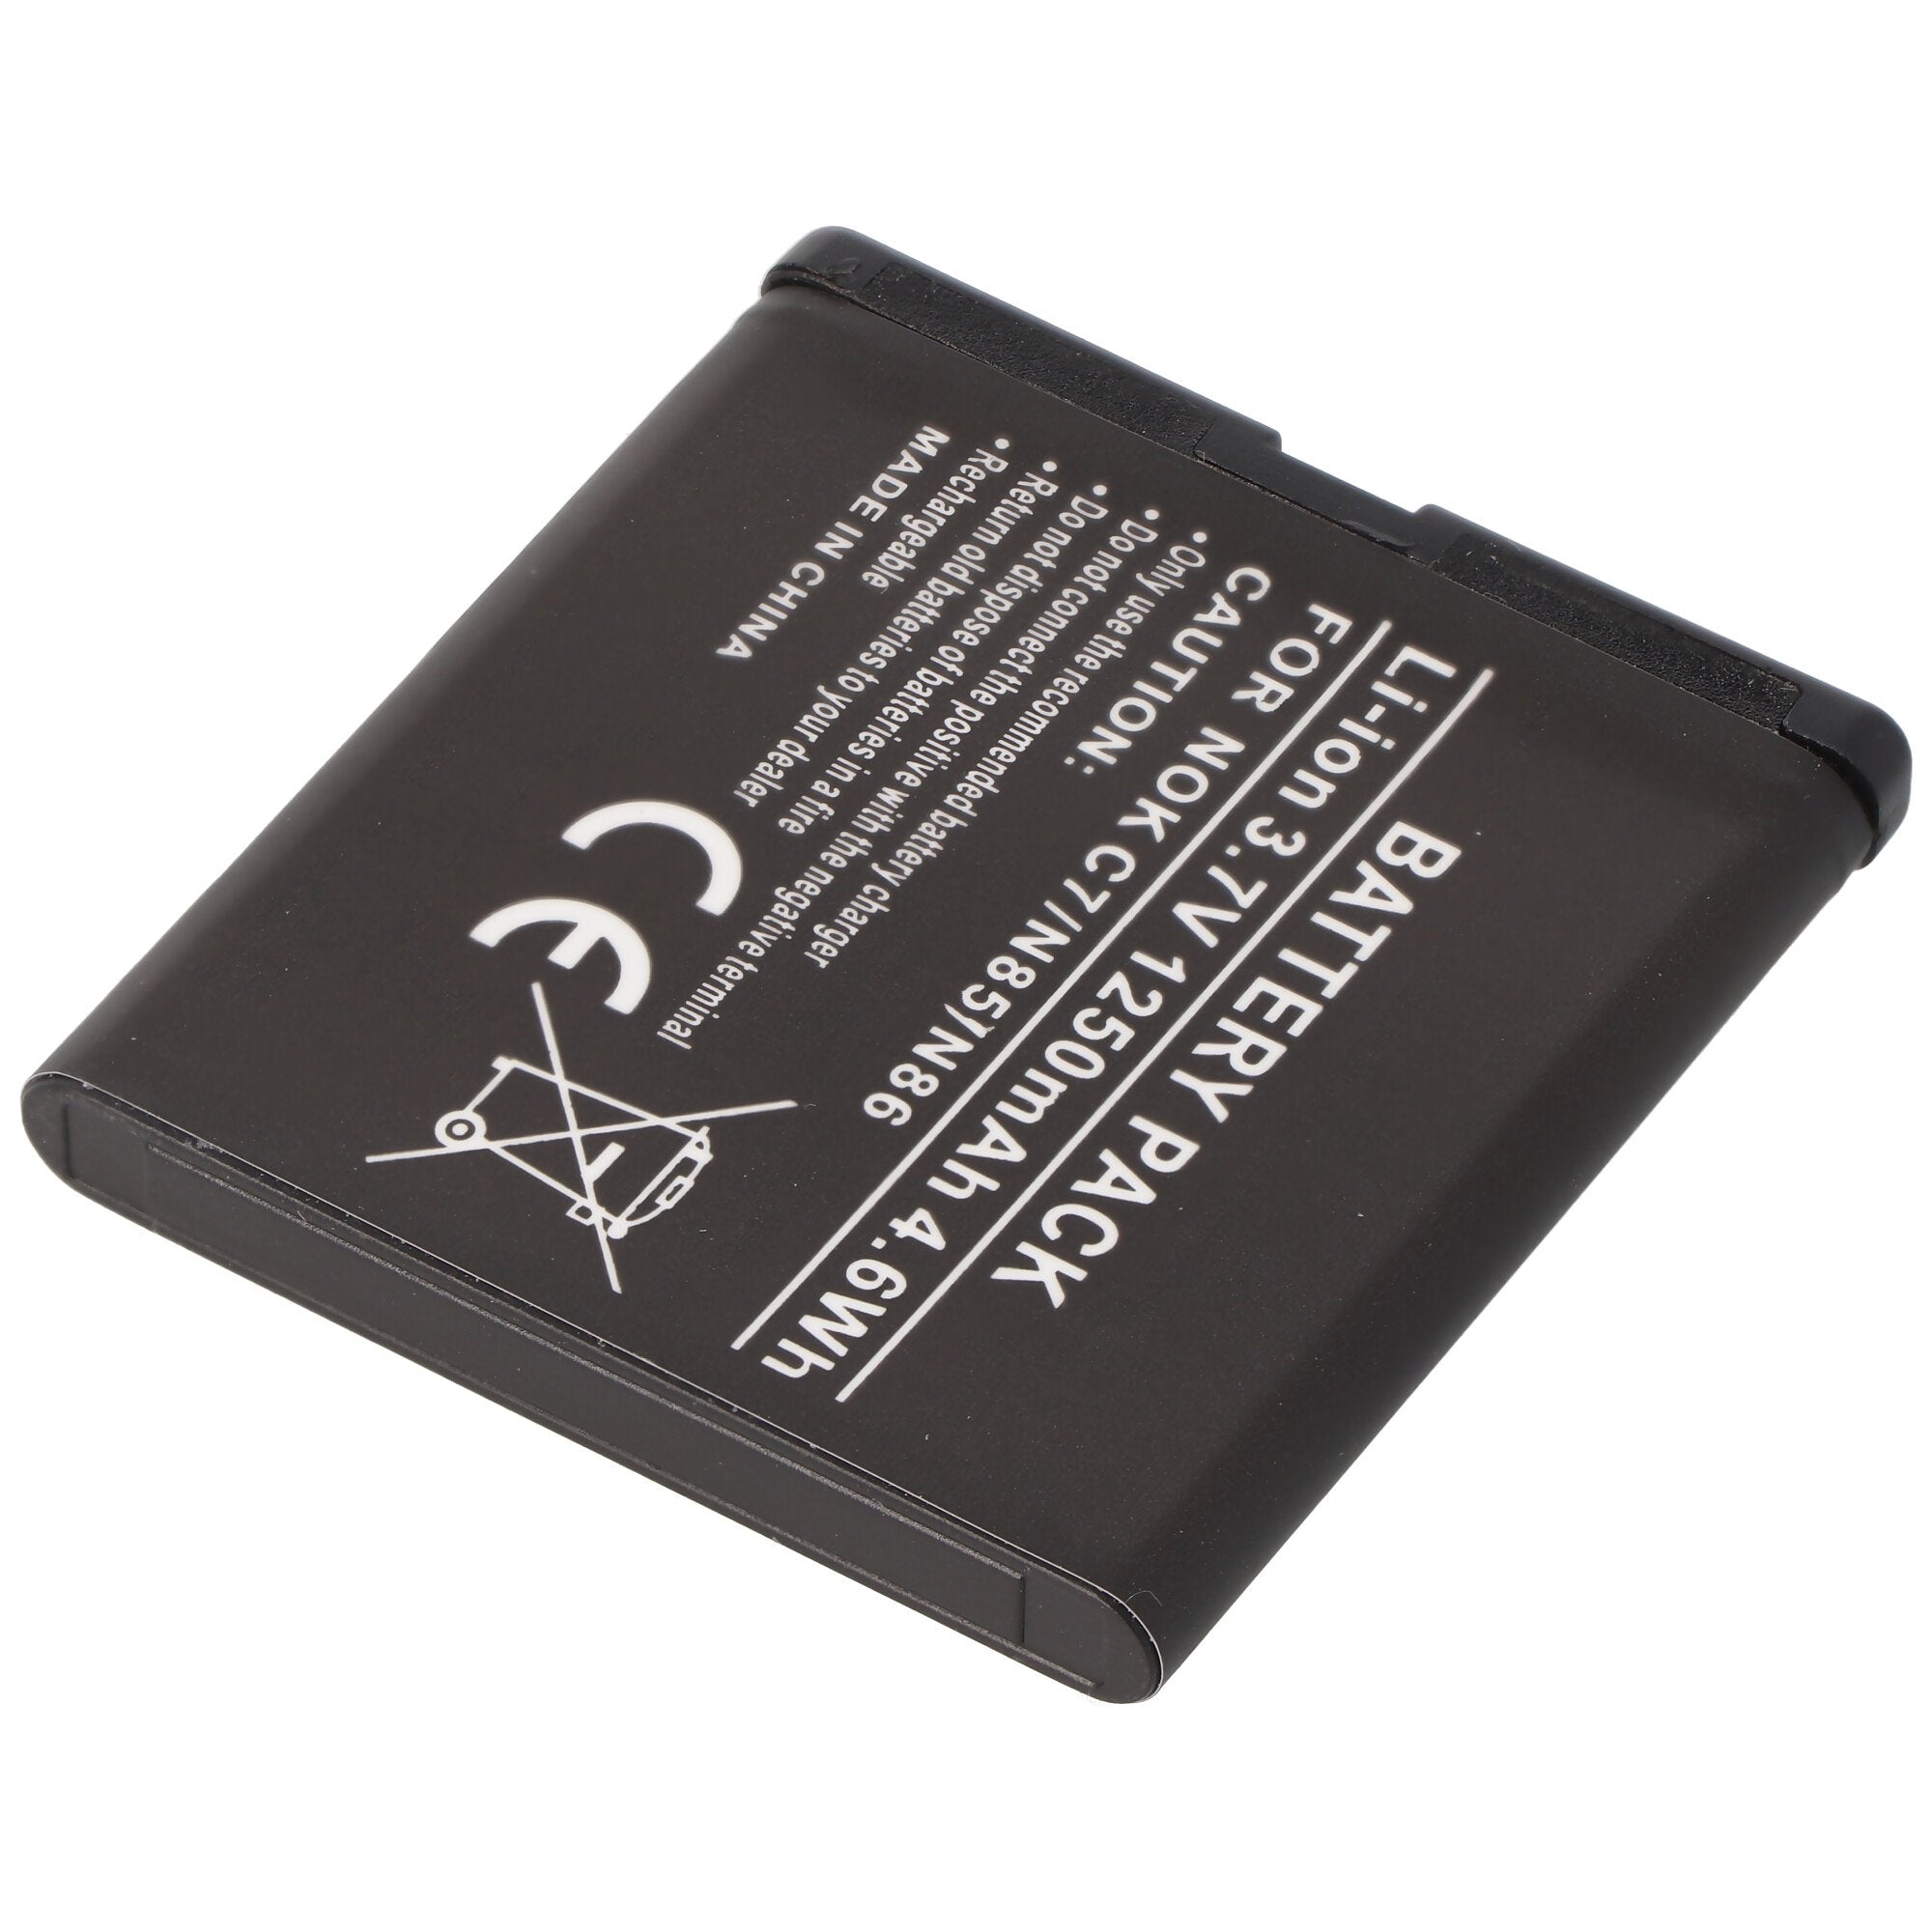 AccuCell battery suitable for Nokia N85, N86 similar to BL-5K